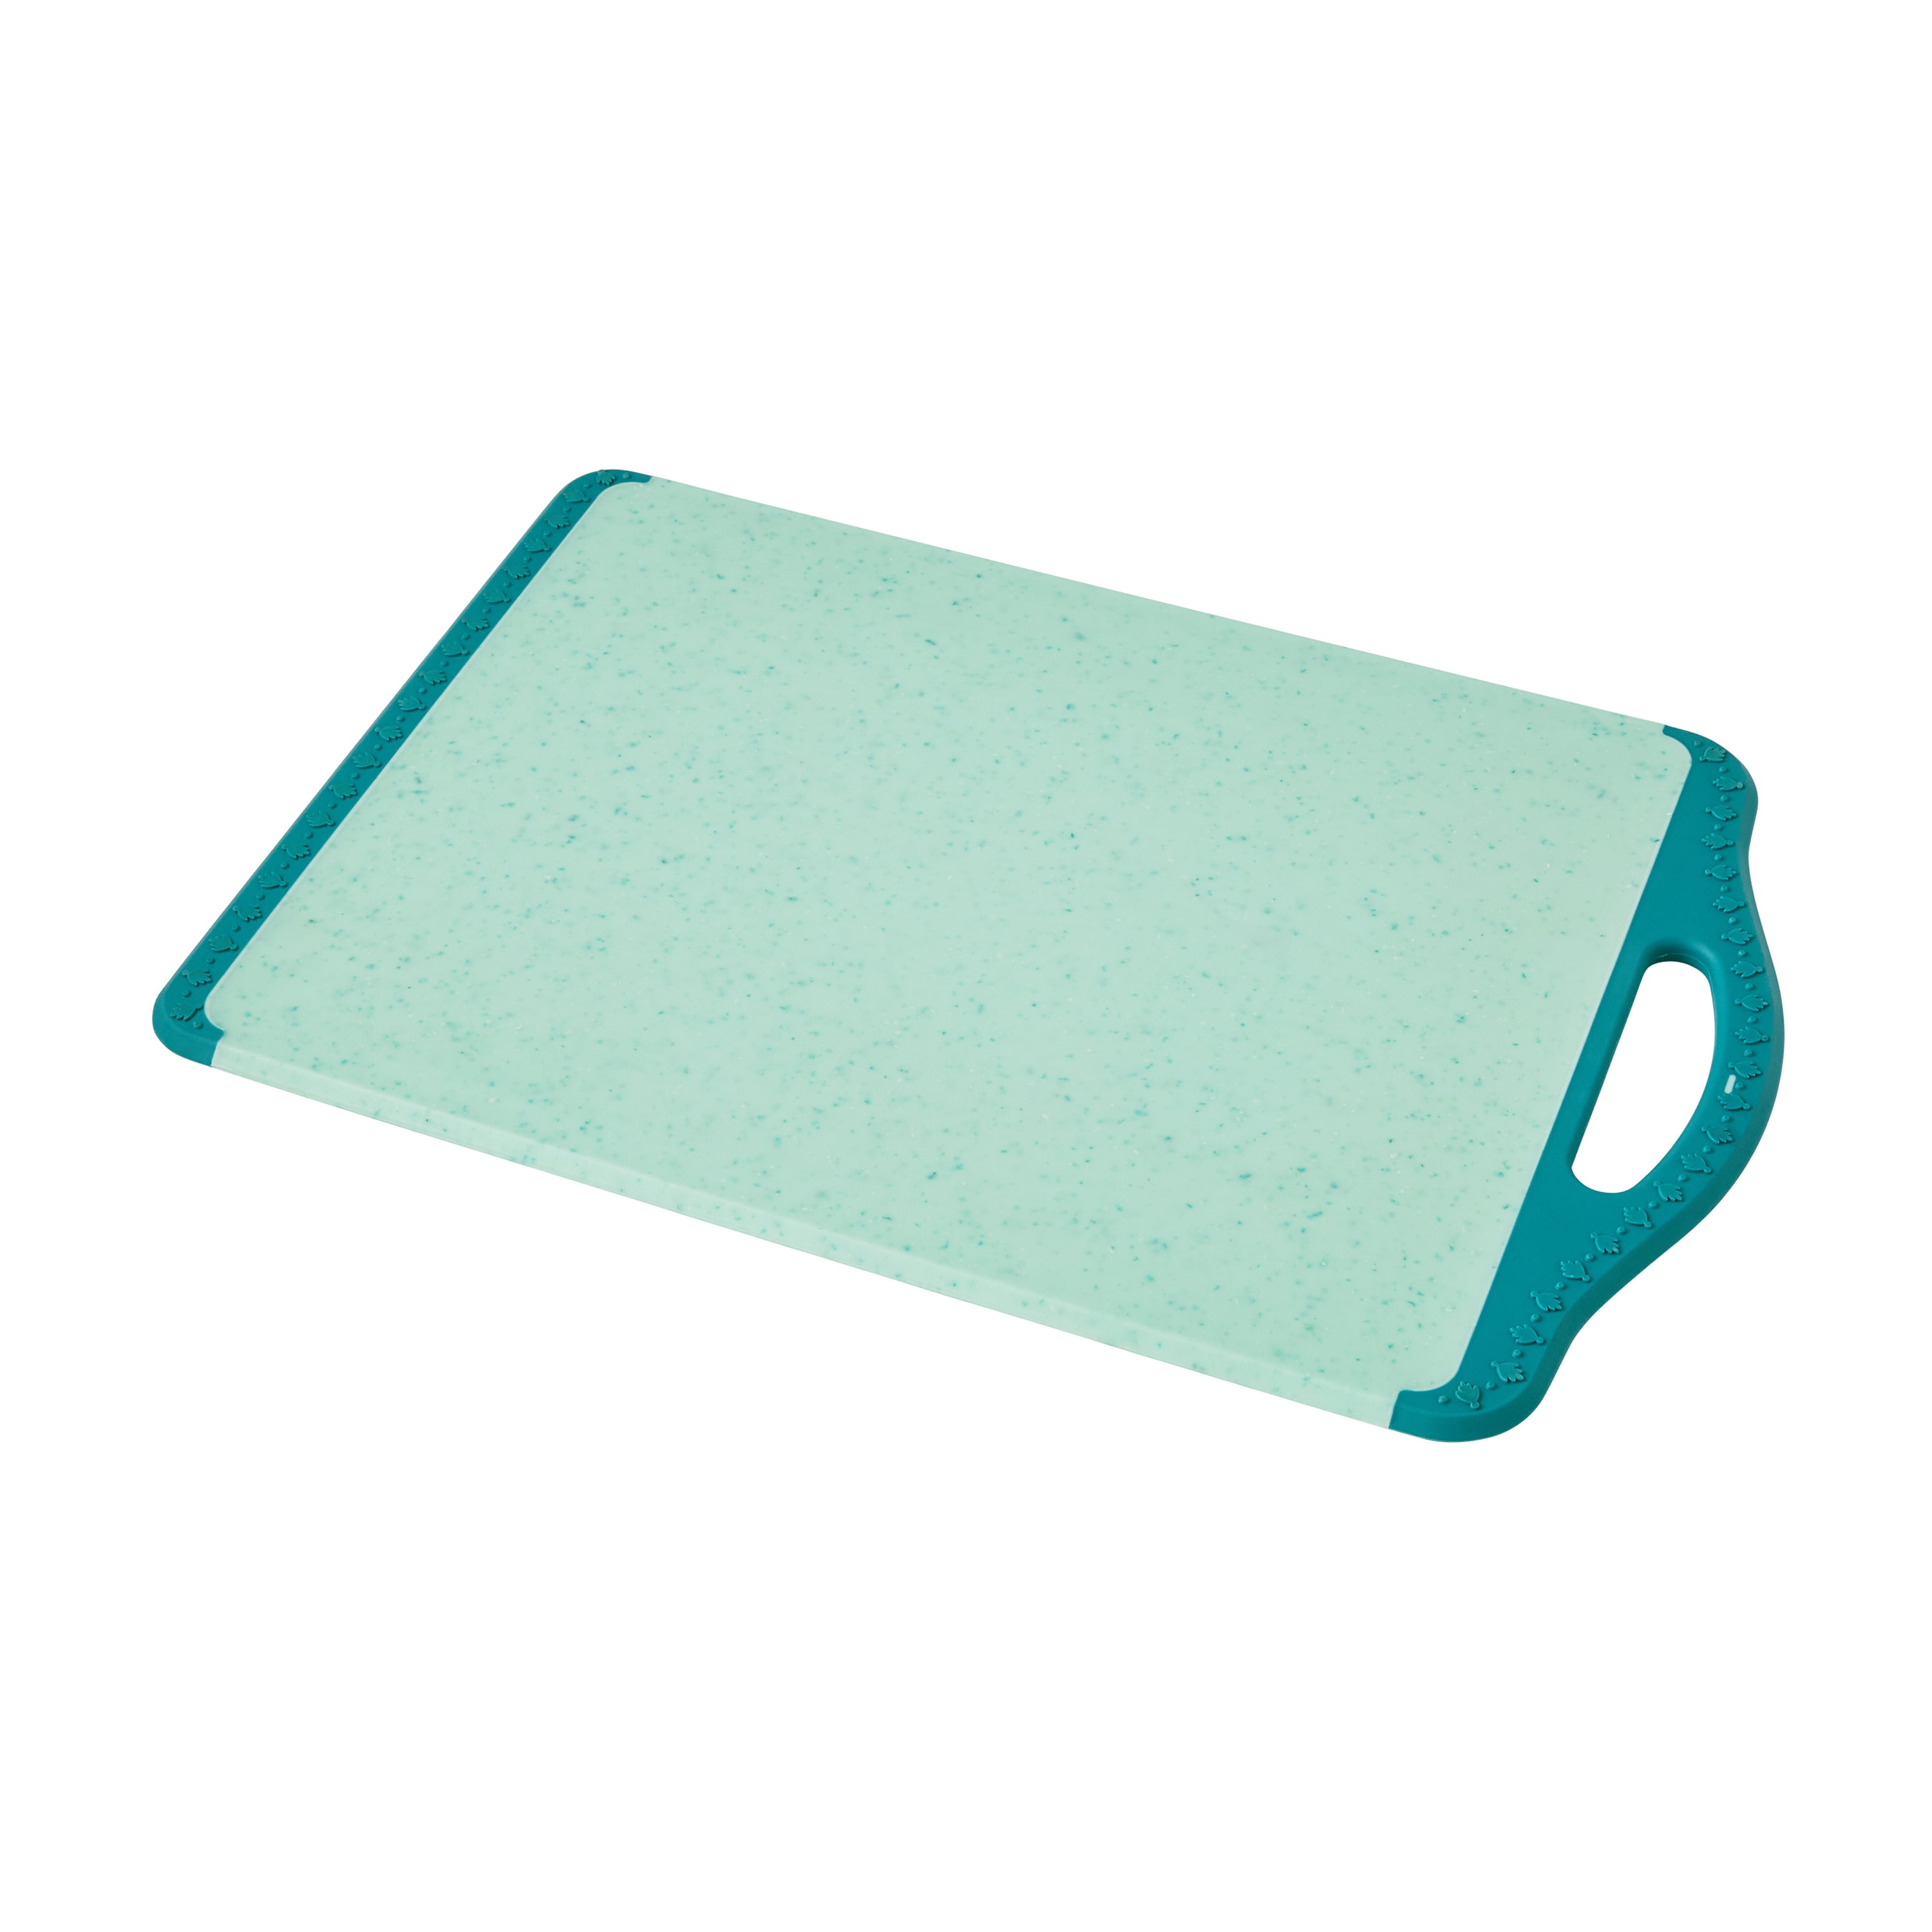 The Pioneer Woman Timeless Poly Cutting Board, Teal